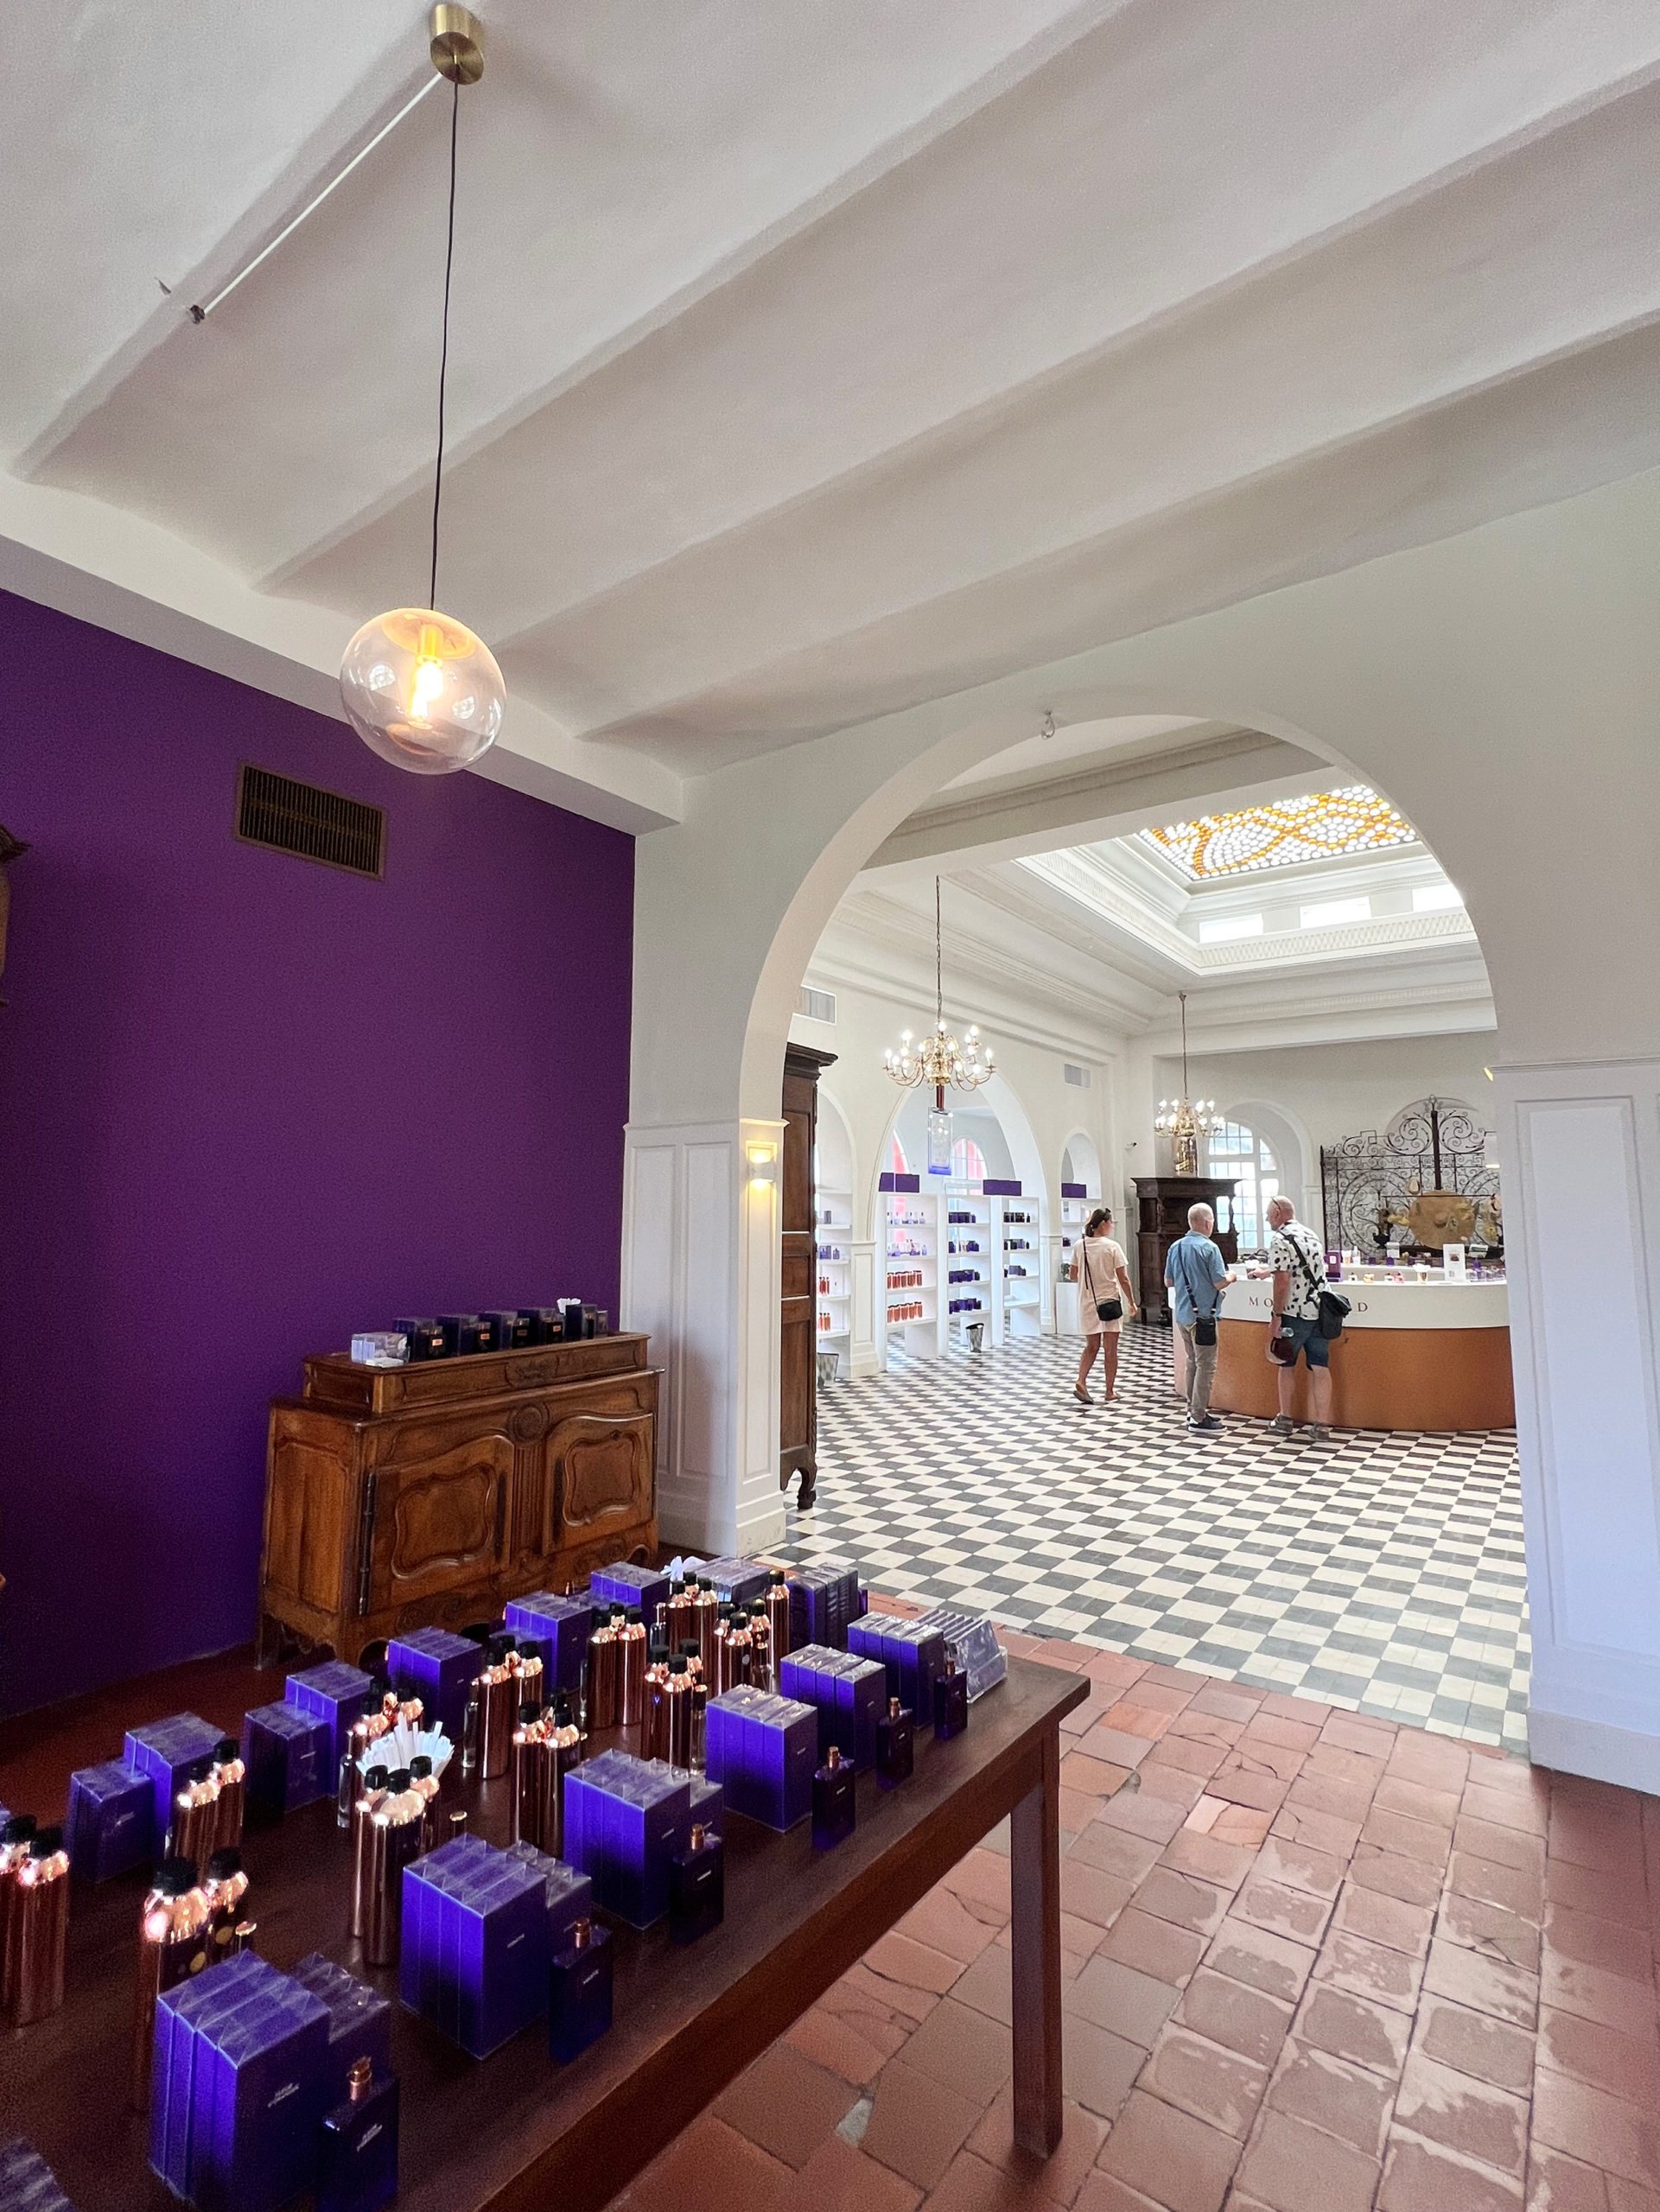 A purple wall on the left with a table with purple perfume boxes in front of it, which opens up to a bright showroom on the right